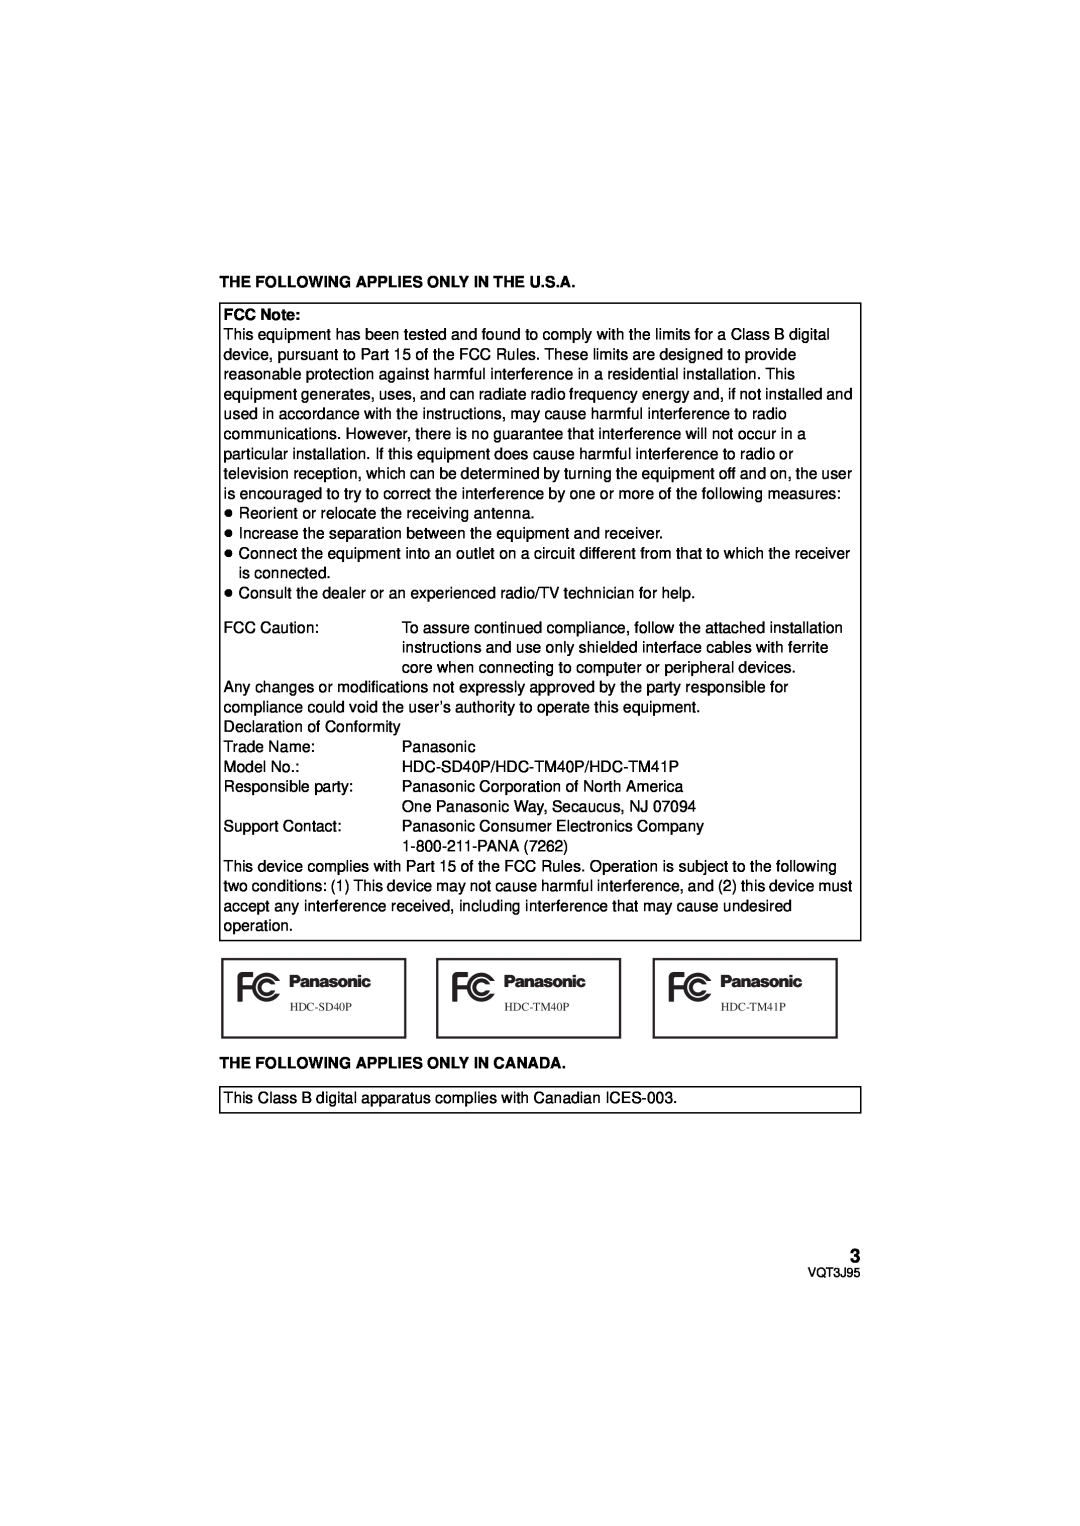 Panasonic HDC-SD40P/PC owner manual THE FOLLOWING APPLIES ONLY IN THE U.S.A FCC Note, The Following Applies Only In Canada 